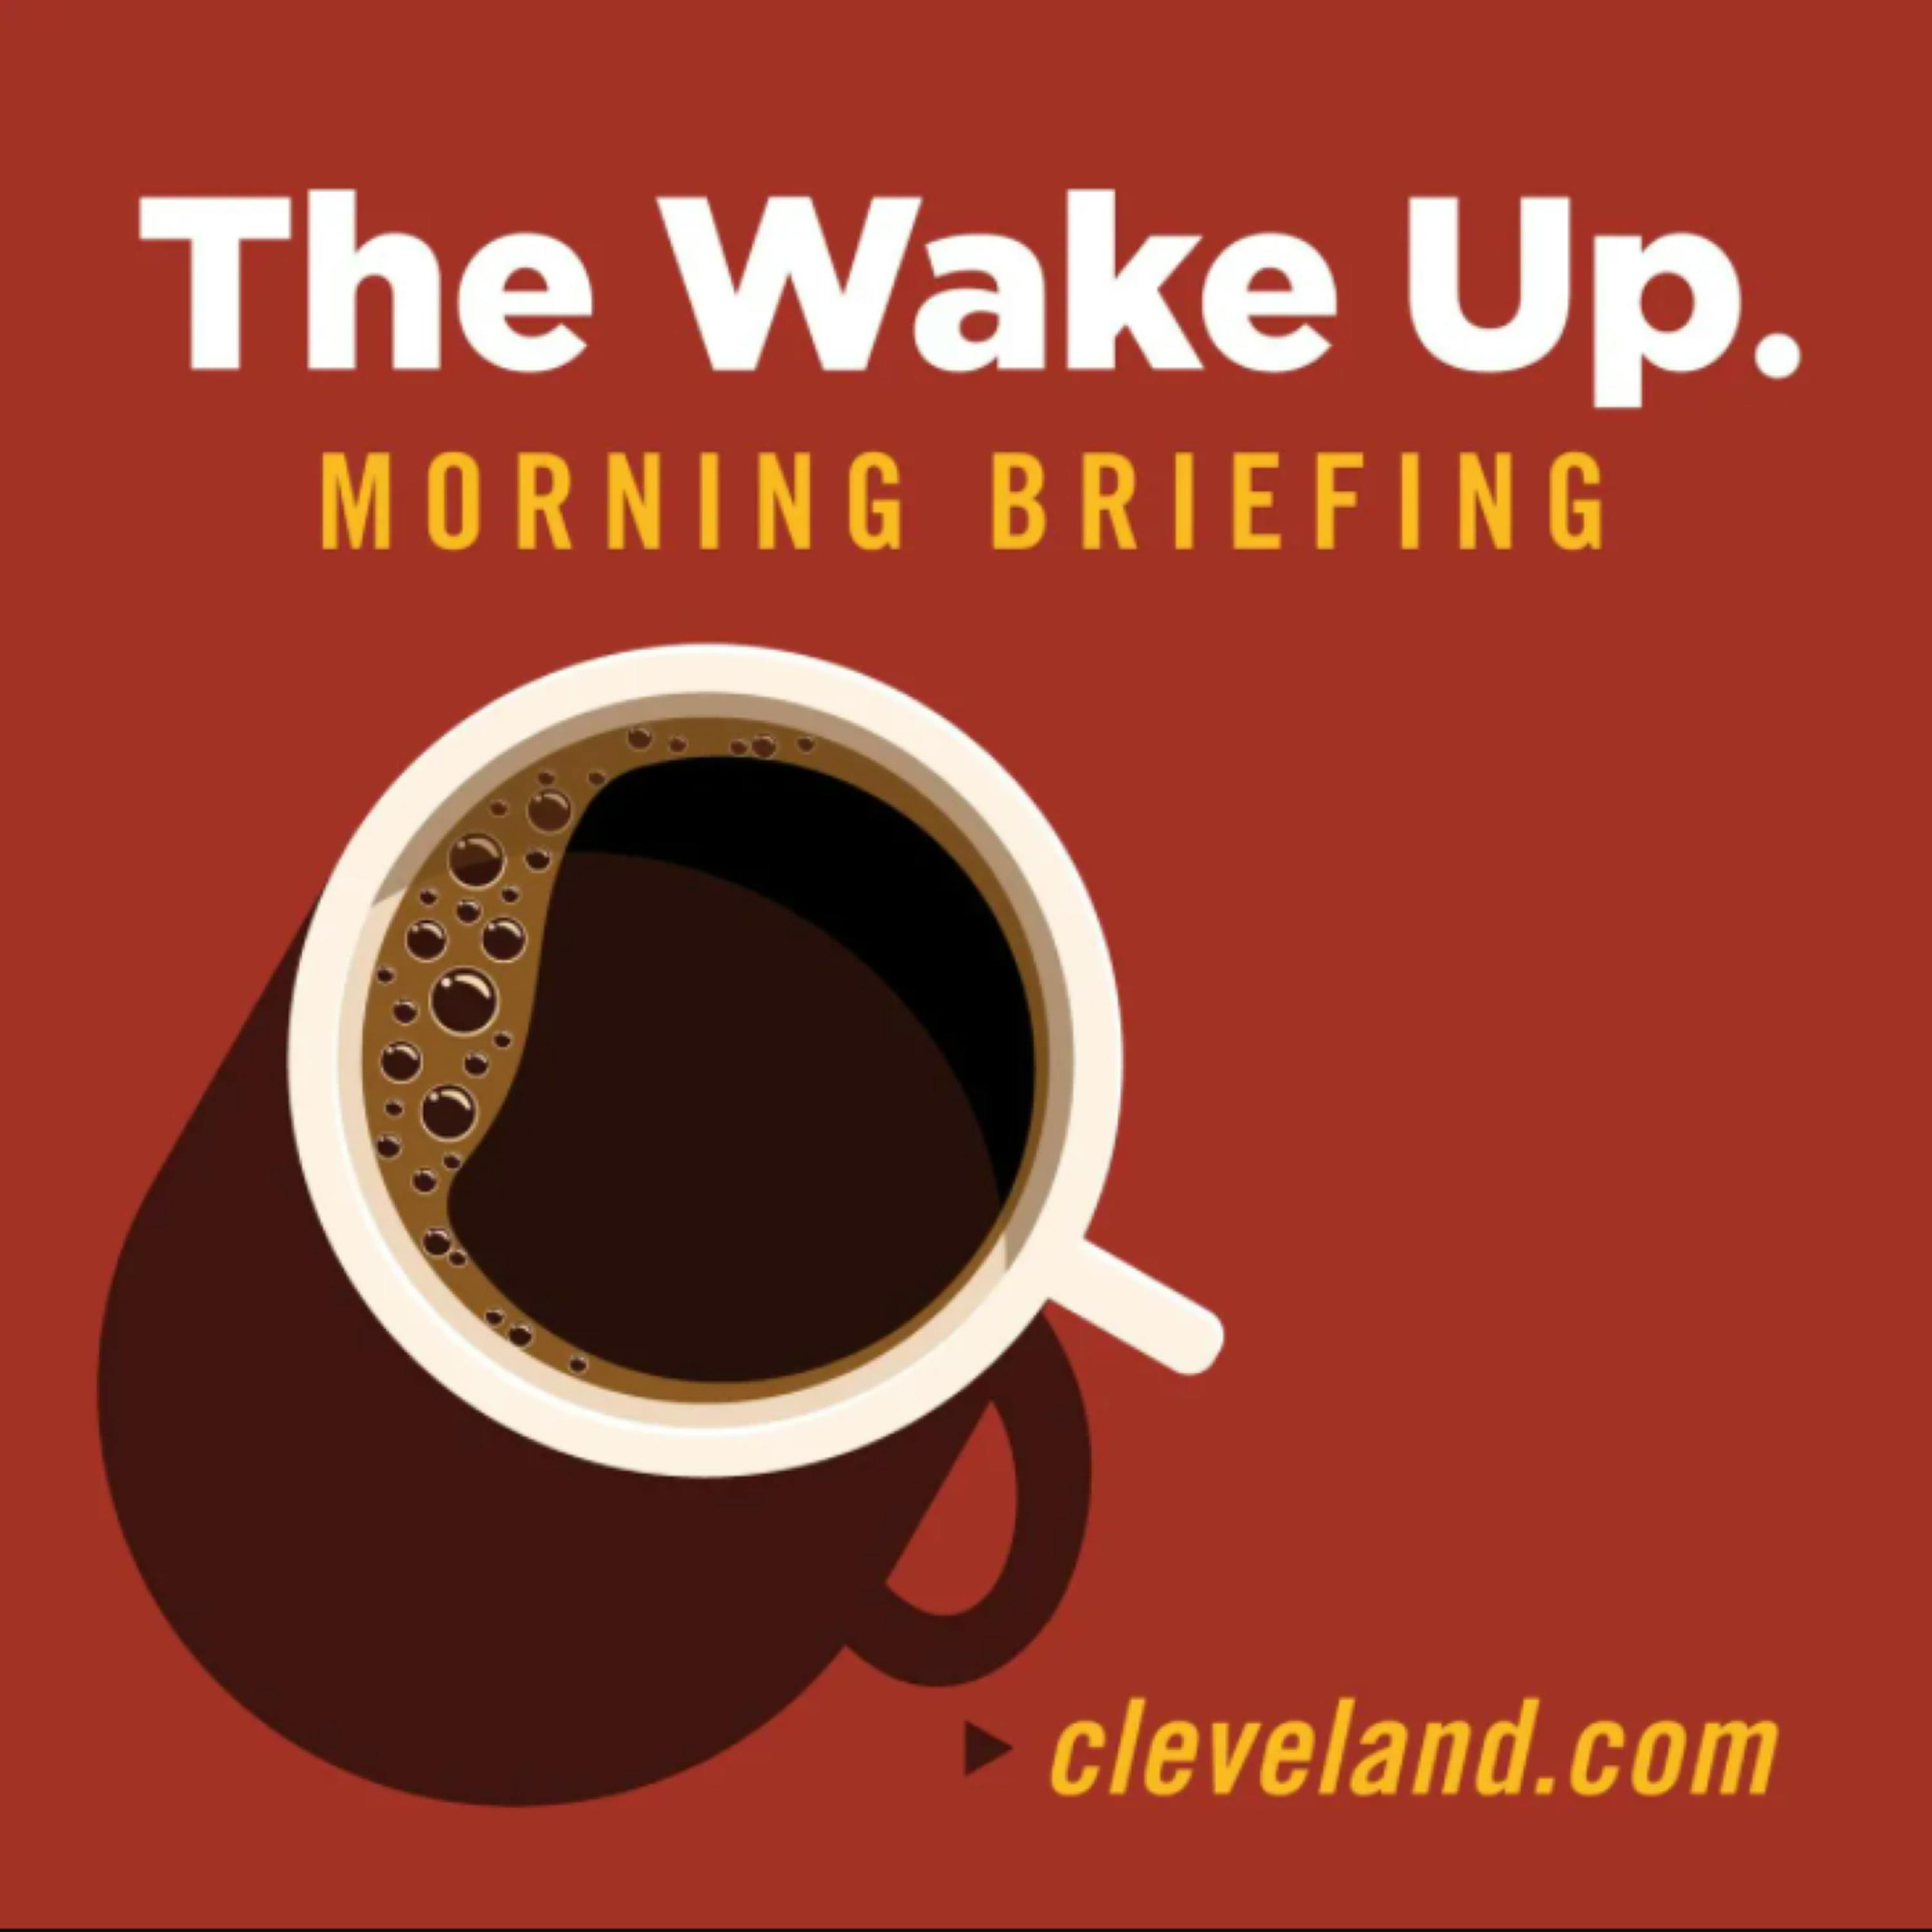 The Wake Up – Nov. 12, 2020 Gov. Mike DeWine reissues mask mandate, threatens to close restaurants, bars, gyms if coronavirus spike continues